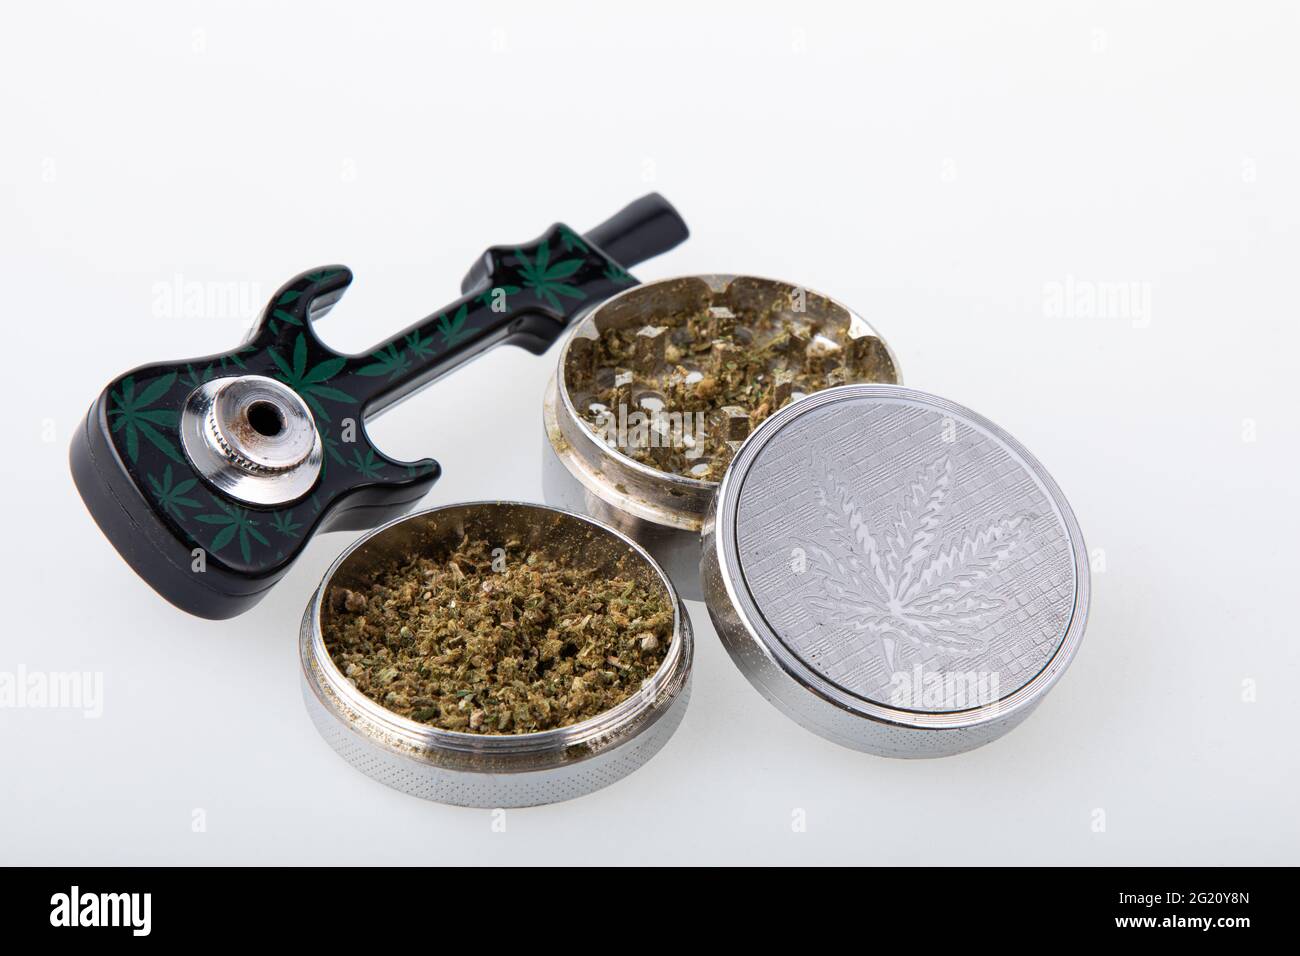 Cannabis pipe with hemp leaves drawings on it and a grinder with cannabis in it  Stock Photo